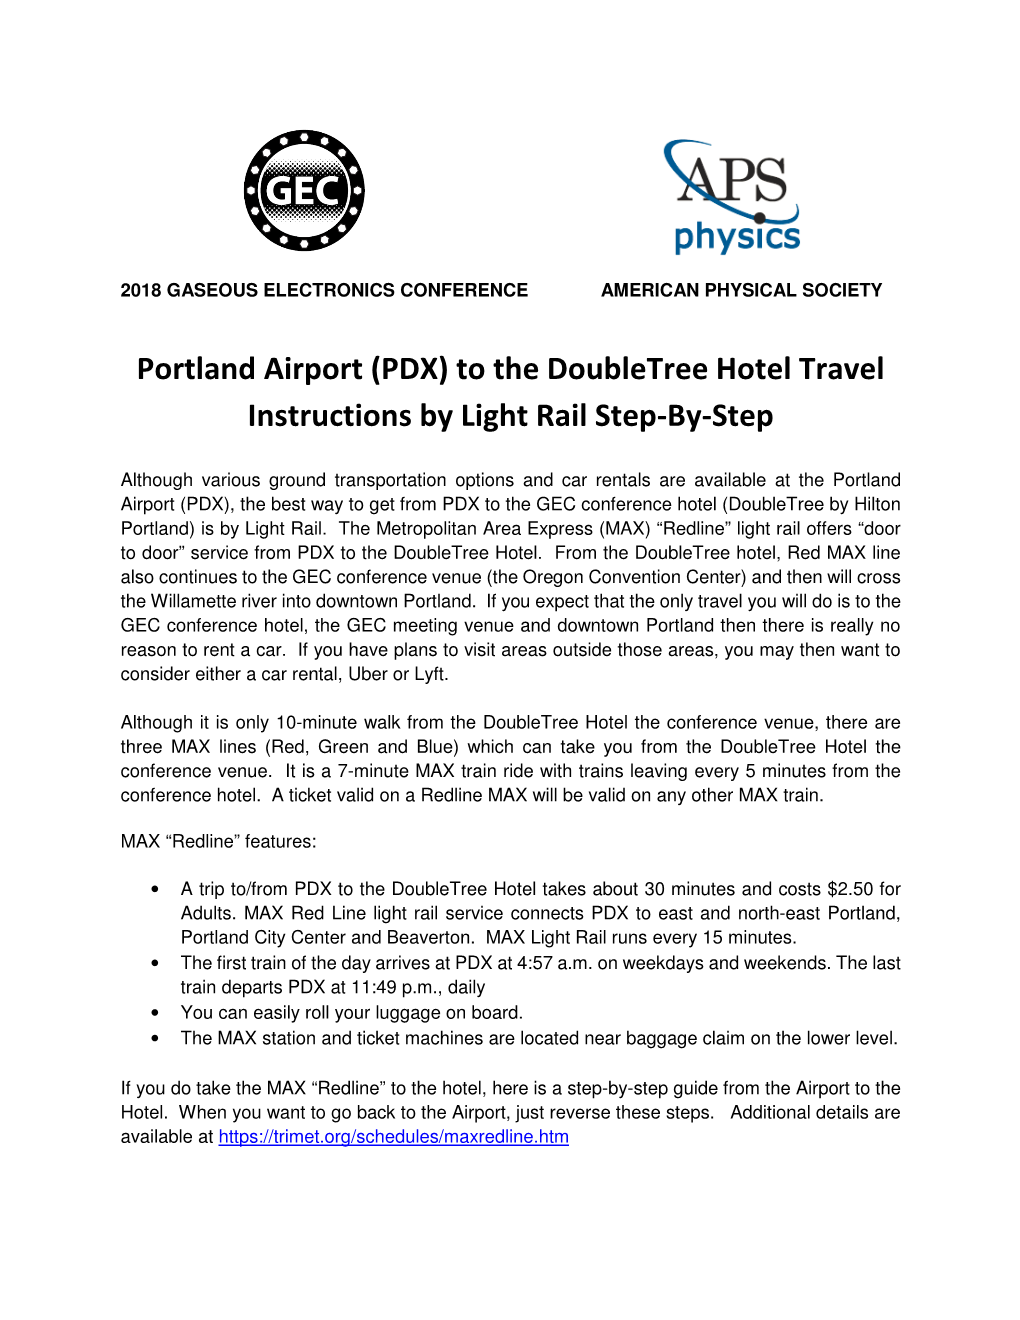 PDX) to the Doubletree Hotel Travel Instructions by Light Rail Step-By-Step